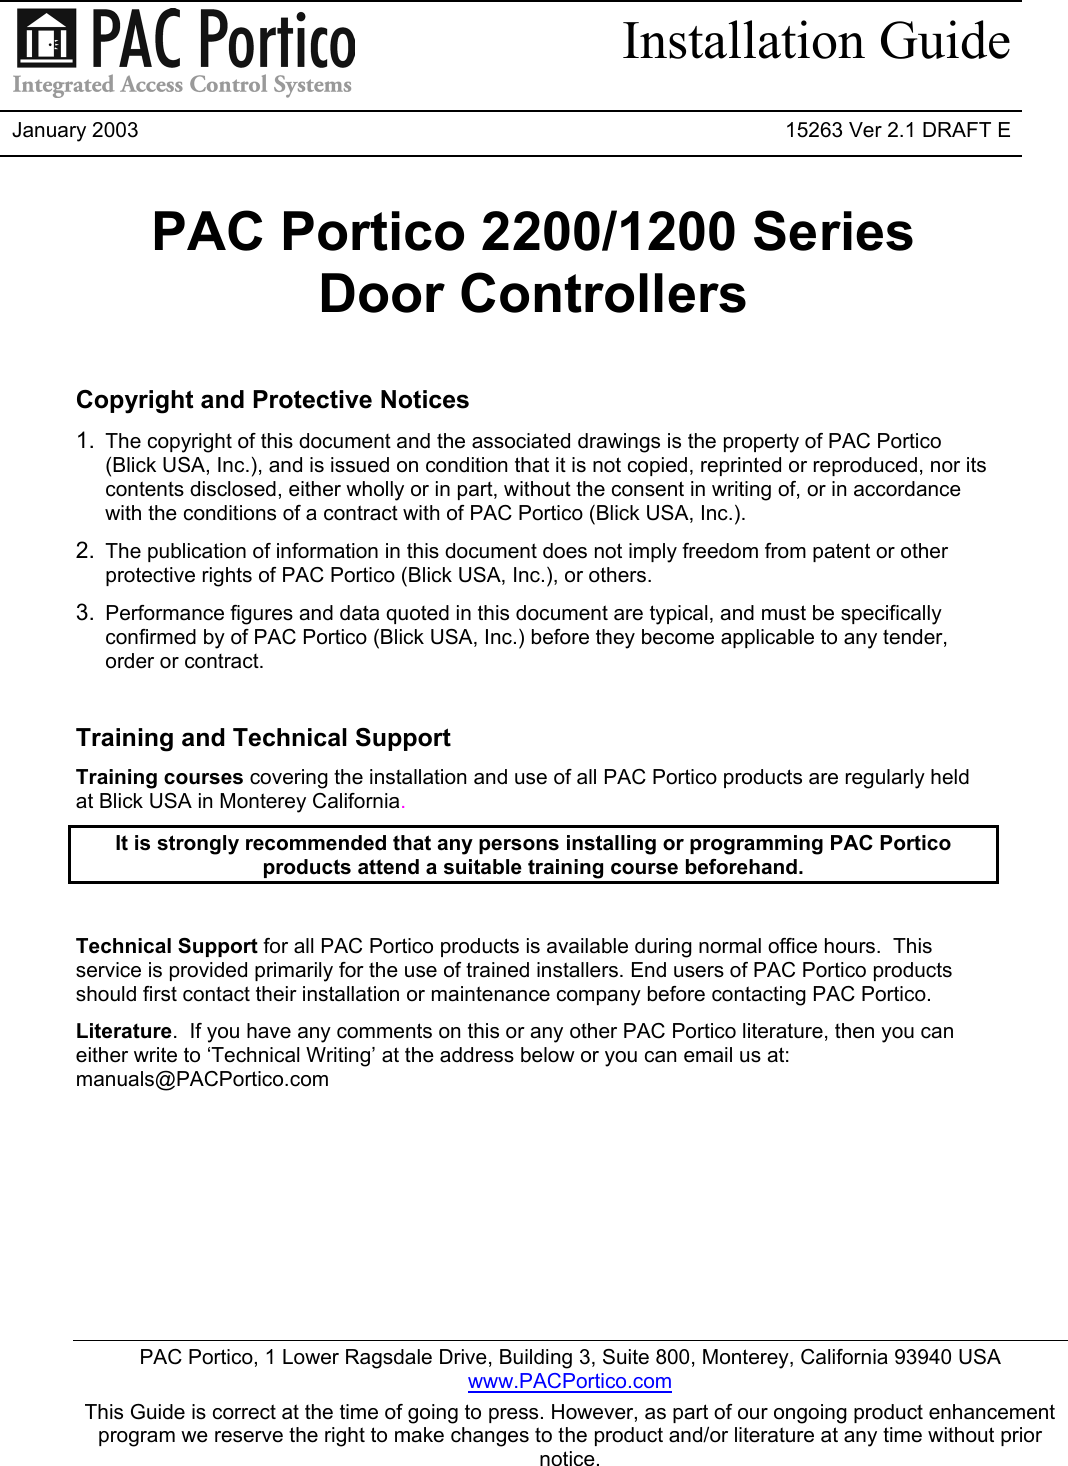 Installation GuideJanuary 2003 15263 Ver 2.1 DRAFT EPAC Portico, 1 Lower Ragsdale Drive, Building 3, Suite 800, Monterey, California 93940 USAwww.PACPortico.comThis Guide is correct at the time of going to press. However, as part of our ongoing product enhancementprogram we reserve the right to make changes to the product and/or literature at any time without priornotice.PAC Portico 2200/1200 SeriesDoor ControllersCopyright and Protective Notices1.  The copyright of this document and the associated drawings is the property of PAC Portico(Blick USA, Inc.), and is issued on condition that it is not copied, reprinted or reproduced, nor itscontents disclosed, either wholly or in part, without the consent in writing of, or in accordancewith the conditions of a contract with of PAC Portico (Blick USA, Inc.).2.  The publication of information in this document does not imply freedom from patent or otherprotective rights of PAC Portico (Blick USA, Inc.), or others.3.  Performance figures and data quoted in this document are typical, and must be specificallyconfirmed by of PAC Portico (Blick USA, Inc.) before they become applicable to any tender,order or contract.Training and Technical SupportTraining courses covering the installation and use of all PAC Portico products are regularly heldat Blick USA in Monterey California.It is strongly recommended that any persons installing or programming PAC Porticoproducts attend a suitable training course beforehand.Technical Support for all PAC Portico products is available during normal office hours.  Thisservice is provided primarily for the use of trained installers. End users of PAC Portico productsshould first contact their installation or maintenance company before contacting PAC Portico.Literature.  If you have any comments on this or any other PAC Portico literature, then you caneither write to ‘Technical Writing’ at the address below or you can email us at:manuals@PACPortico.com